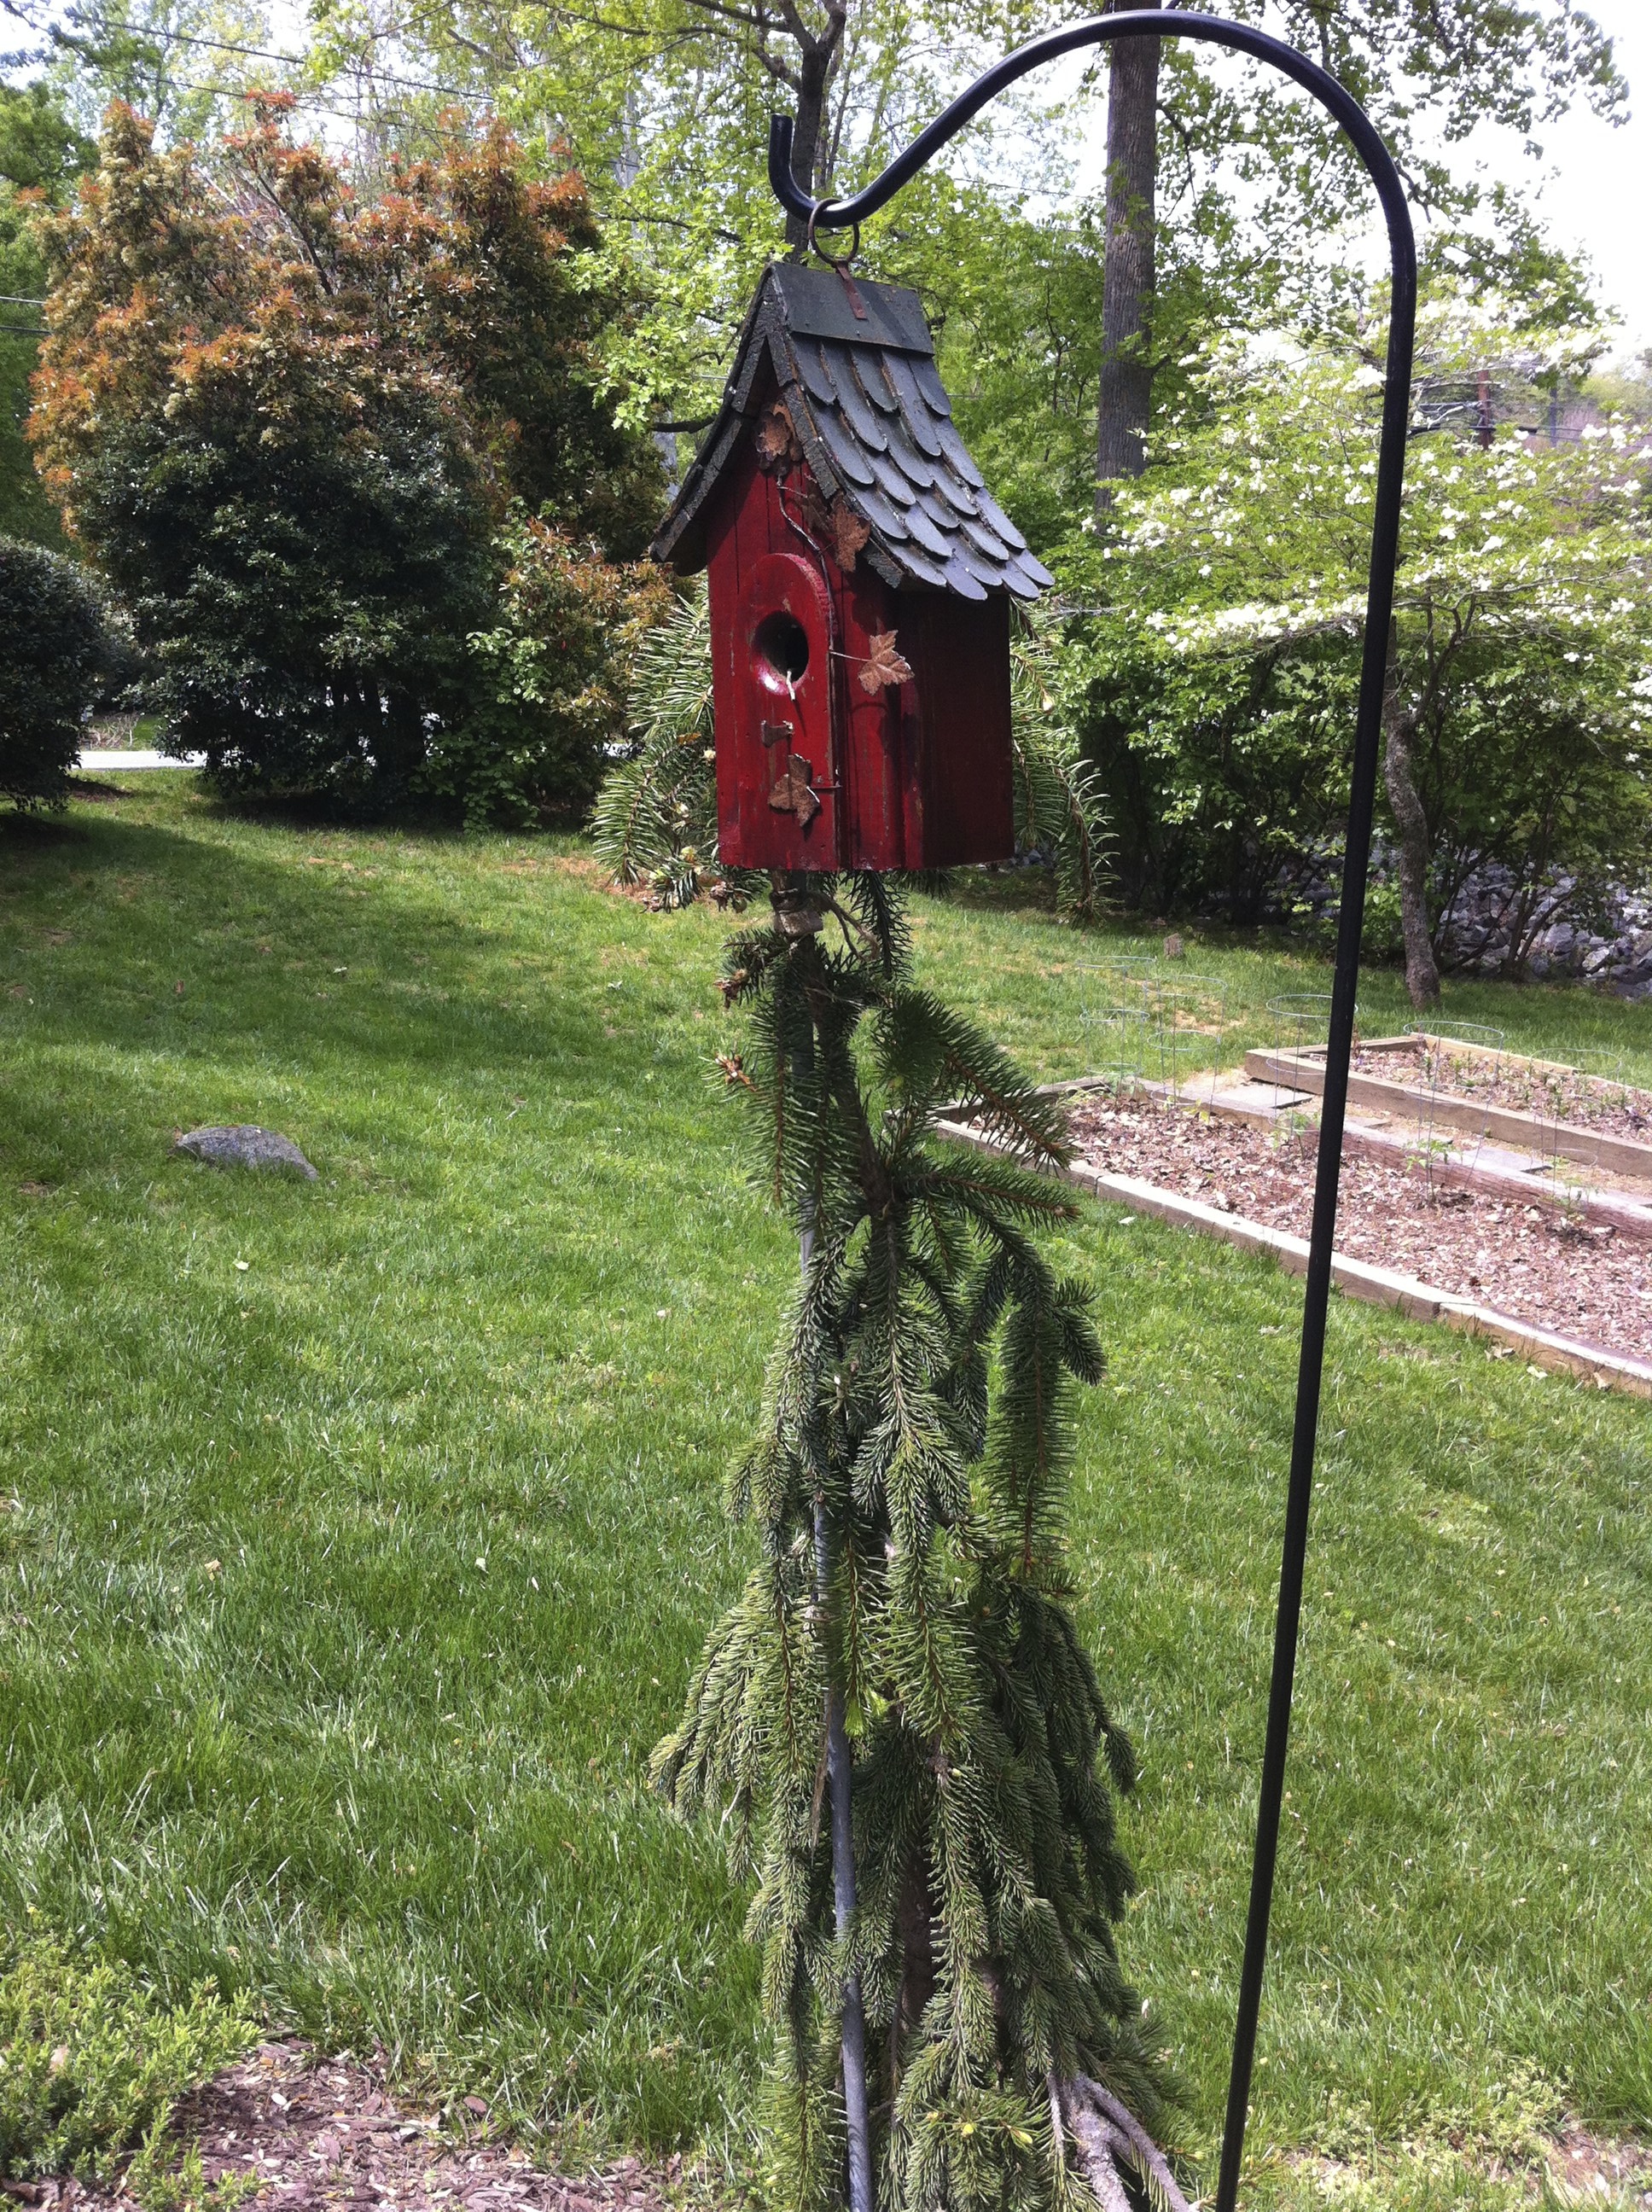 Keep Snakes Out of Your Bird House! - Growing In My ...